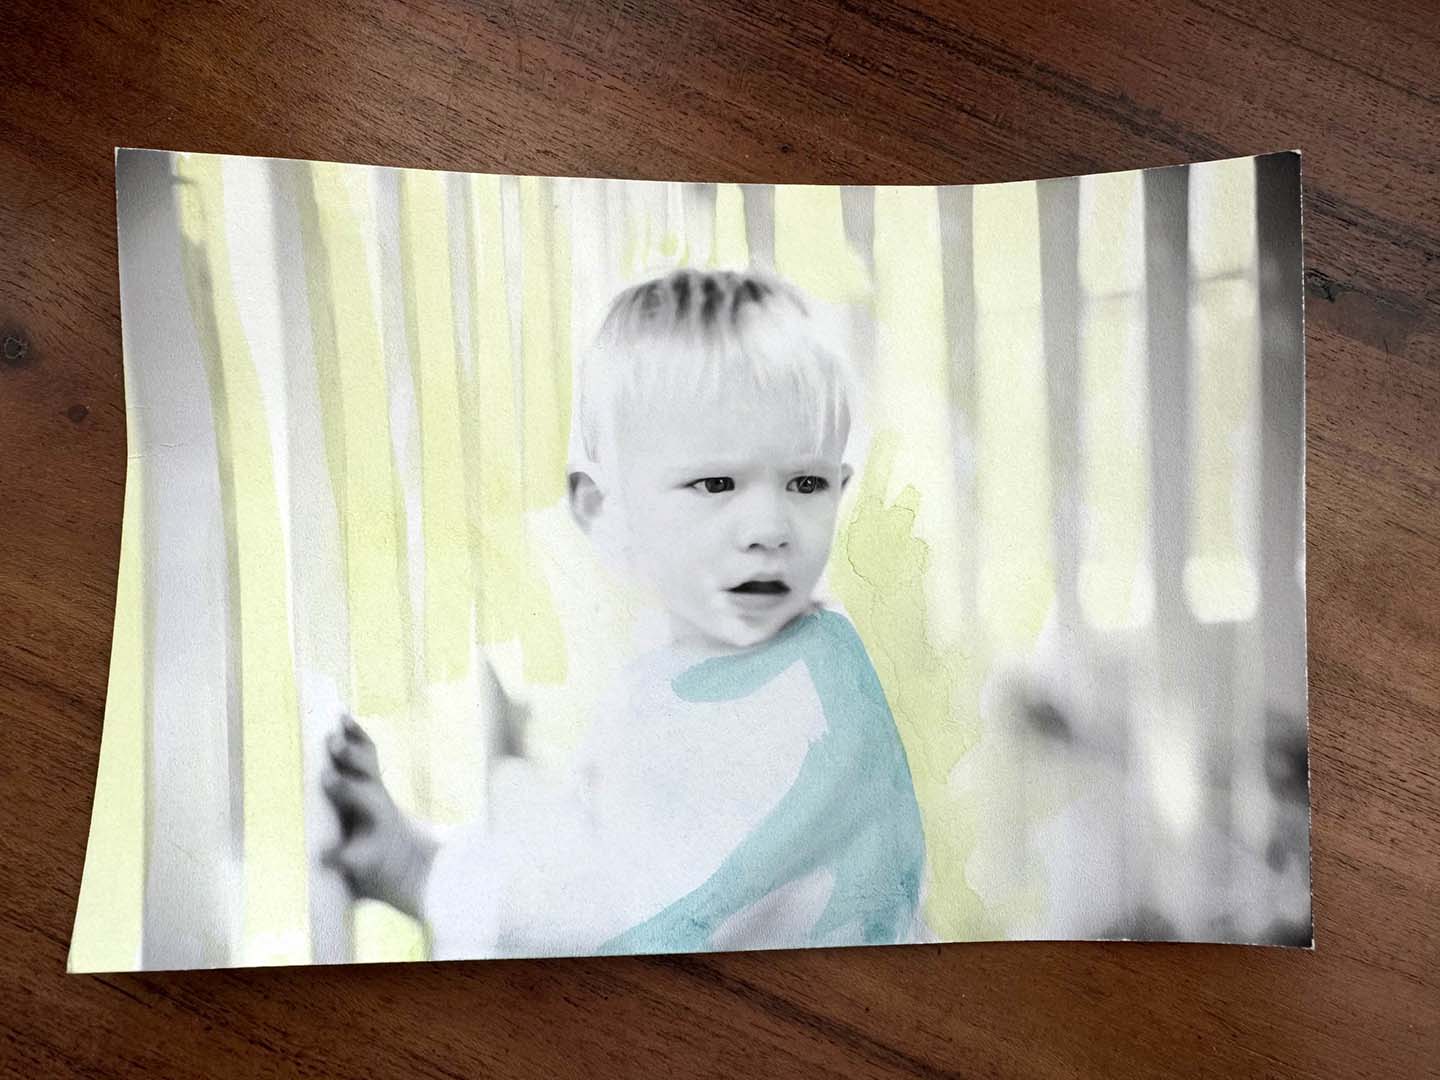 painted photo as an example of photography lessons for kids